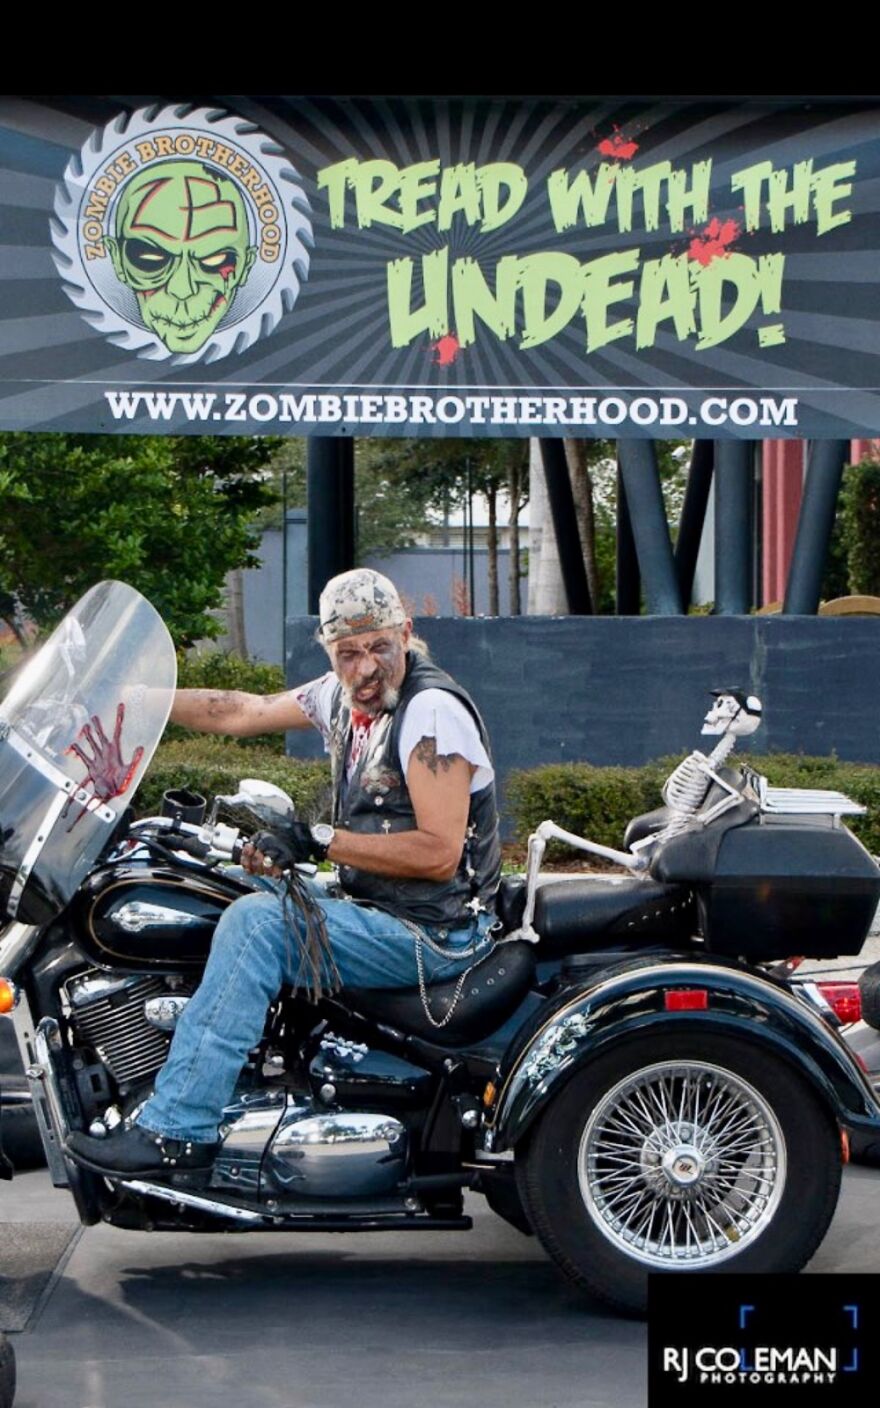 I Believe This Was 2009, Zombie Motorcycle Run 500* Riders. 2021 Ghost Rider In Another Post